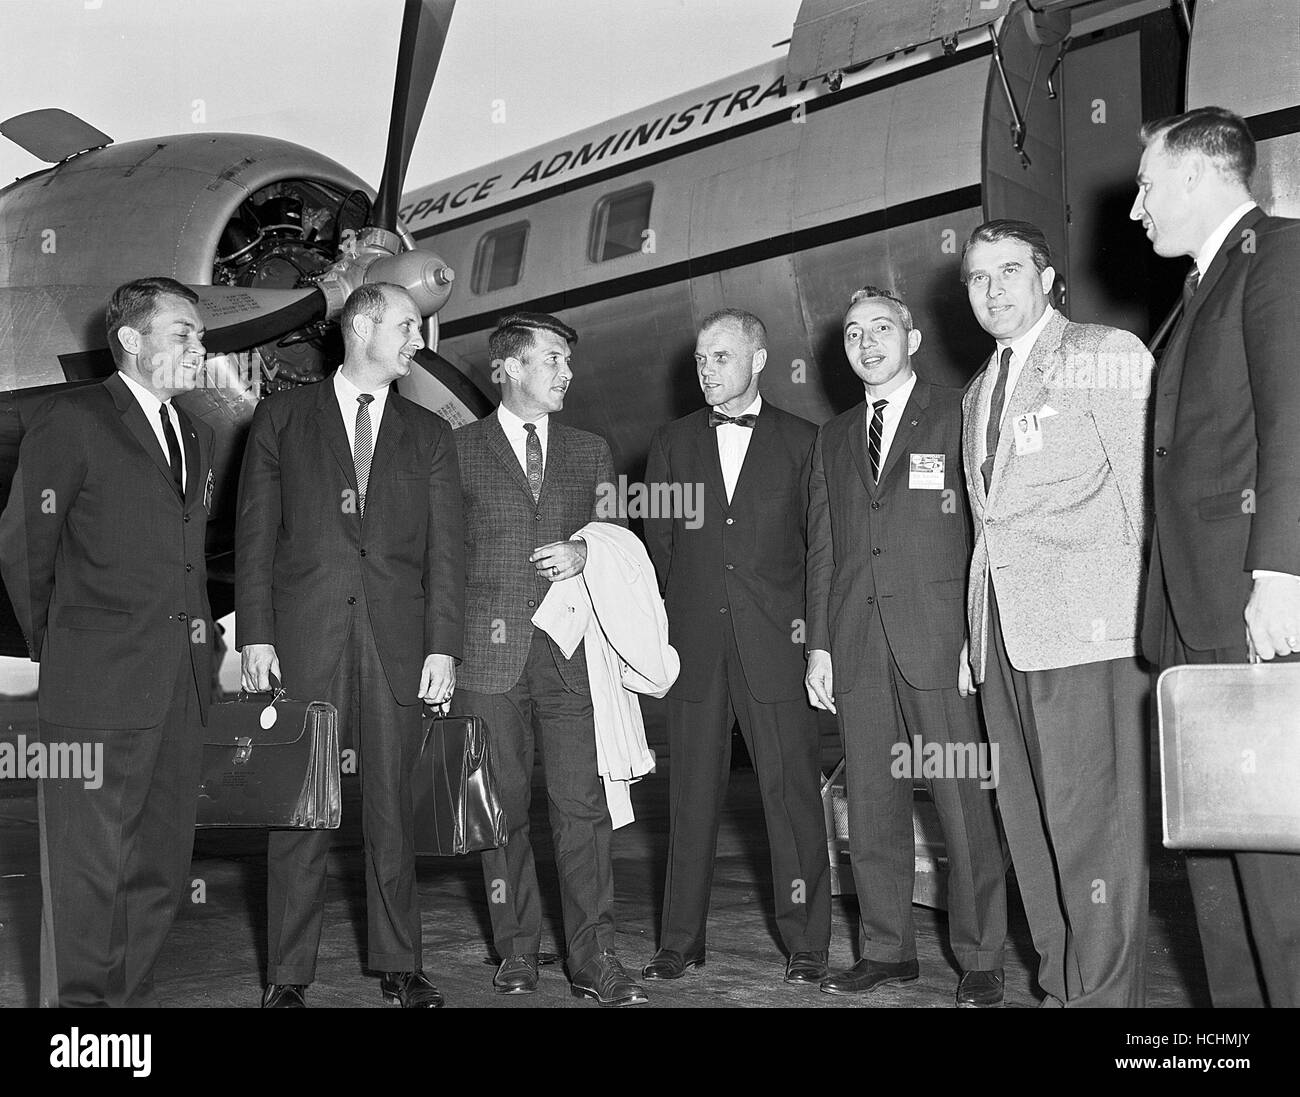 Officials from NASA Headquarters and the astronauts often met with Dr. Wernher von Braun in Huntsville, Alabama. This photograph was taken in September 1962 during one such visit. From left to right are Elliot See, Tom Stafford, Wally Schirra, John Glenn, Brainerd Holmes, Dr. von Braun, and Jim Lovell.Credit: NASA via CNP /MediaPunch Stock Photo